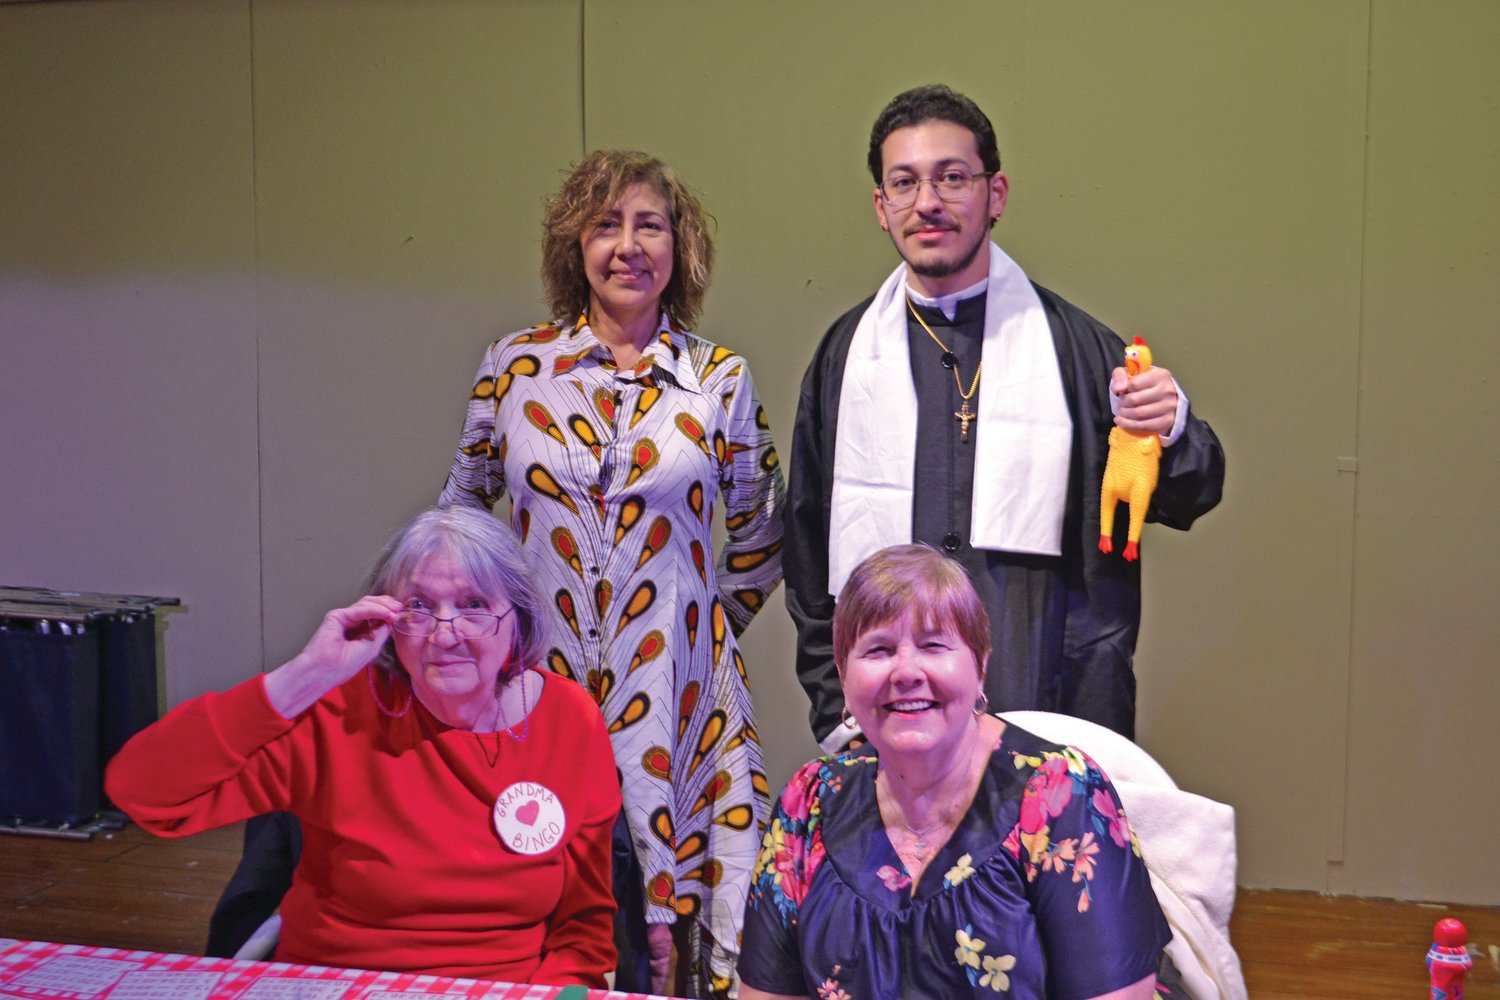 The cast of “Queen of Bingo.” Pictured left to right front row: LeJanice Groves and DeAnne Sawyer. Back row: Aida Del Valle and Jorge McInturff.